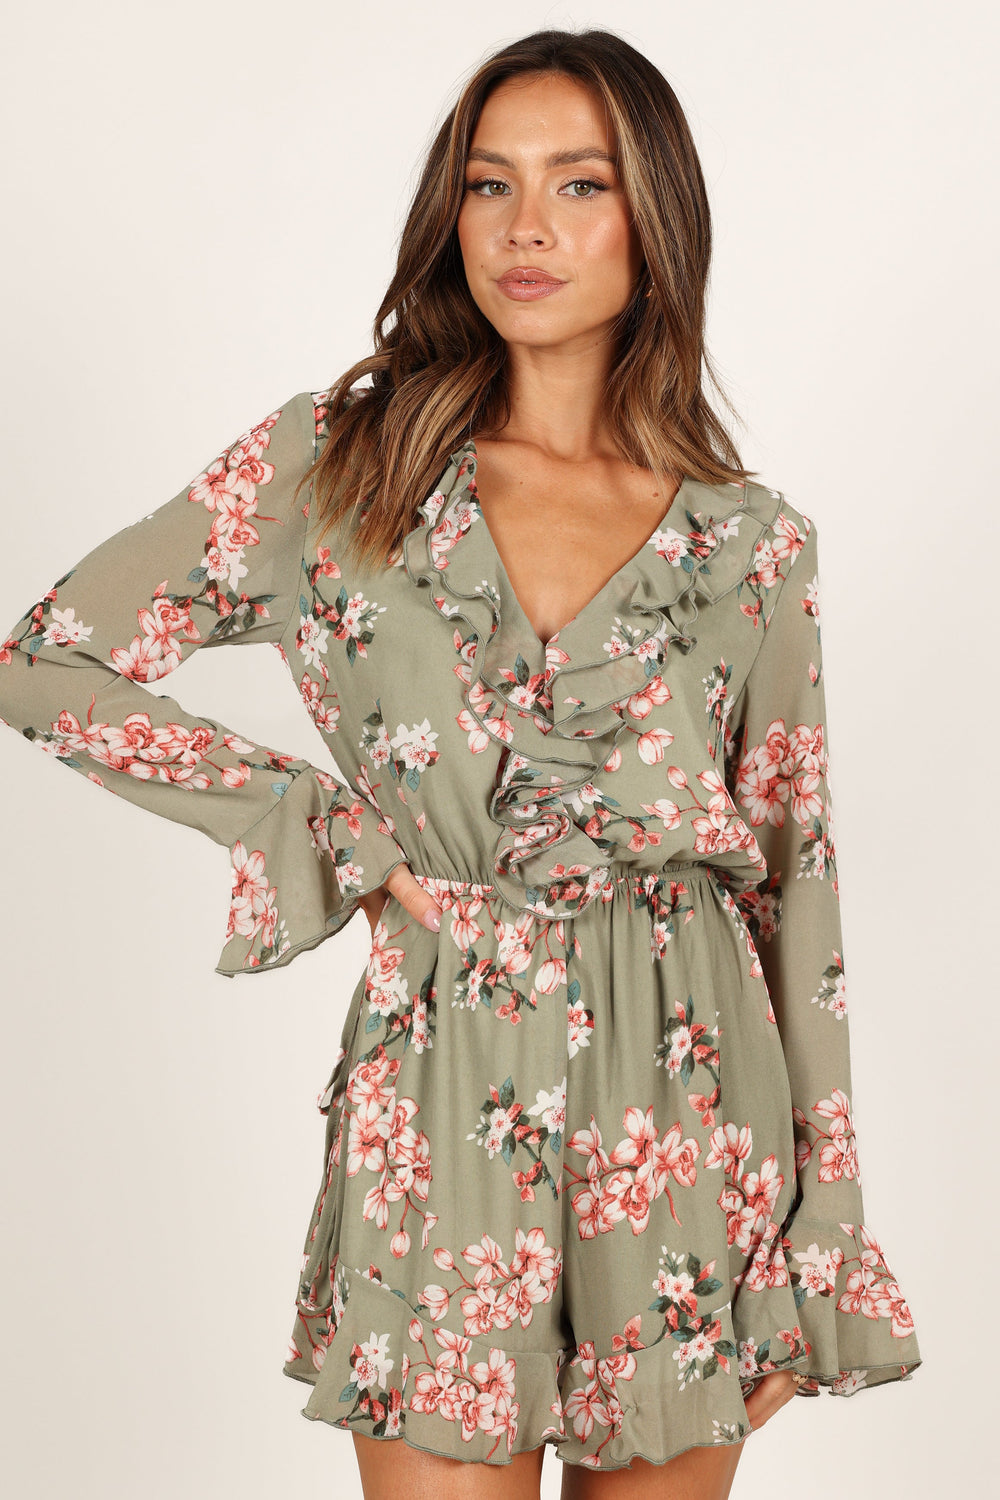 Petal and Pup USA Rompers Rilynn Frill Long Sleeve Playsuit - Sage Floral